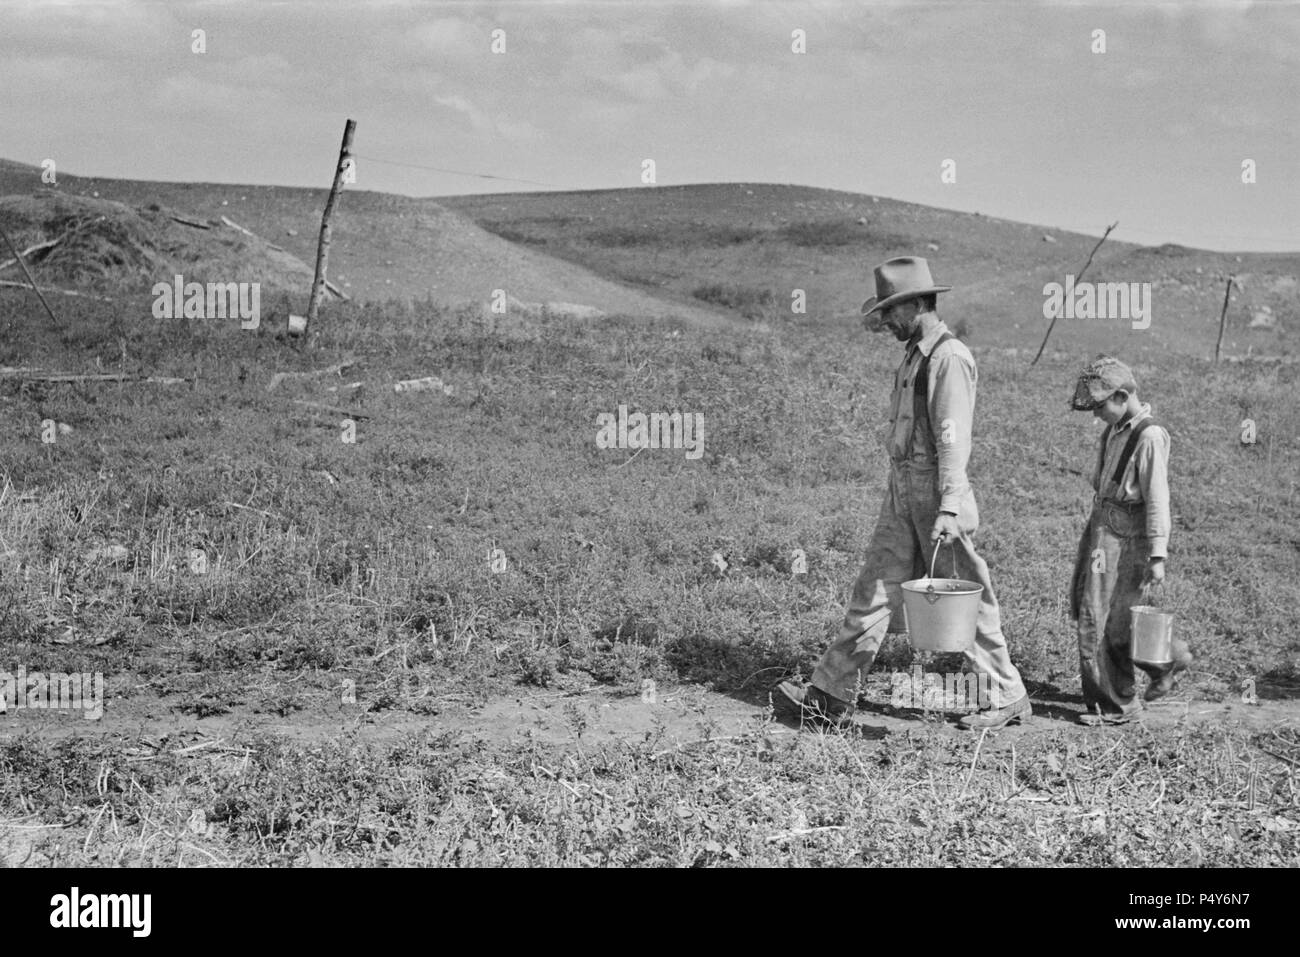 William Huravitch and Son Carrying Water to their Home during Drought, Water Source is about a Half Mile Away, Williams County, North Dakota, USA, Russell Lee, U.S. Resettlement Administration, September 1937 Stock Photo